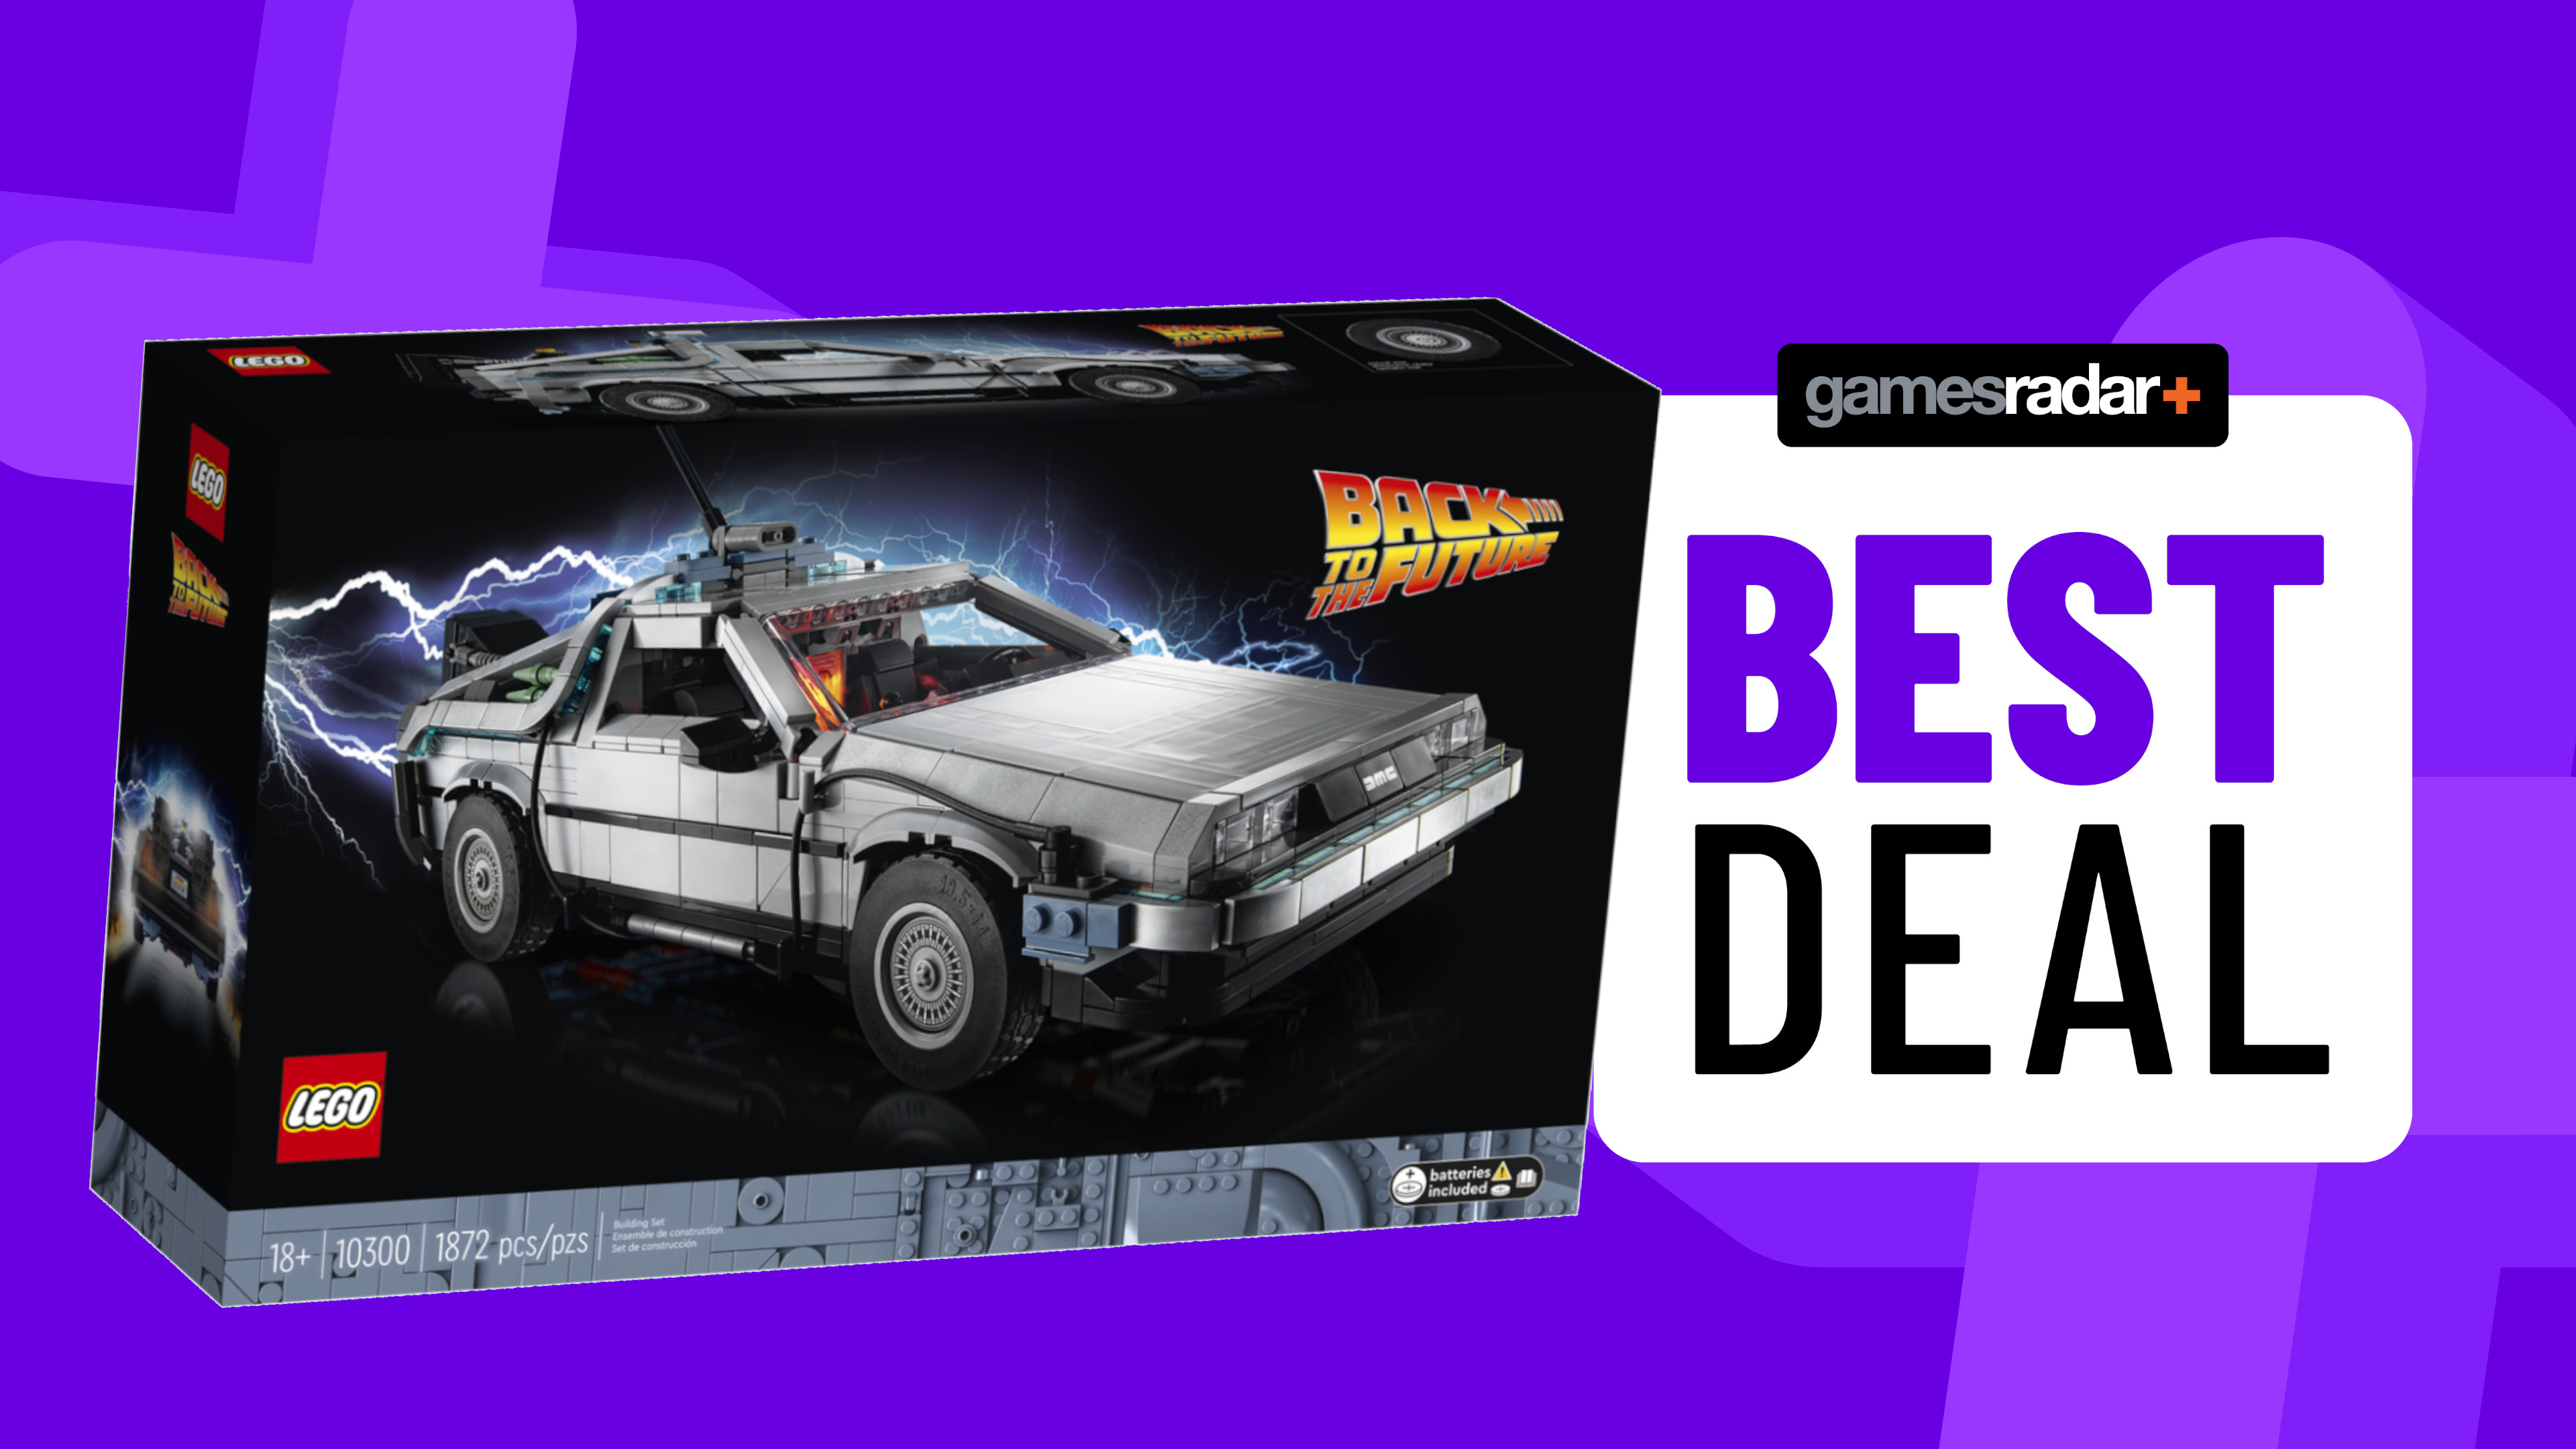 LEGO Goes Back To The Future With Three-In-One DeLorean Time Machine Kit